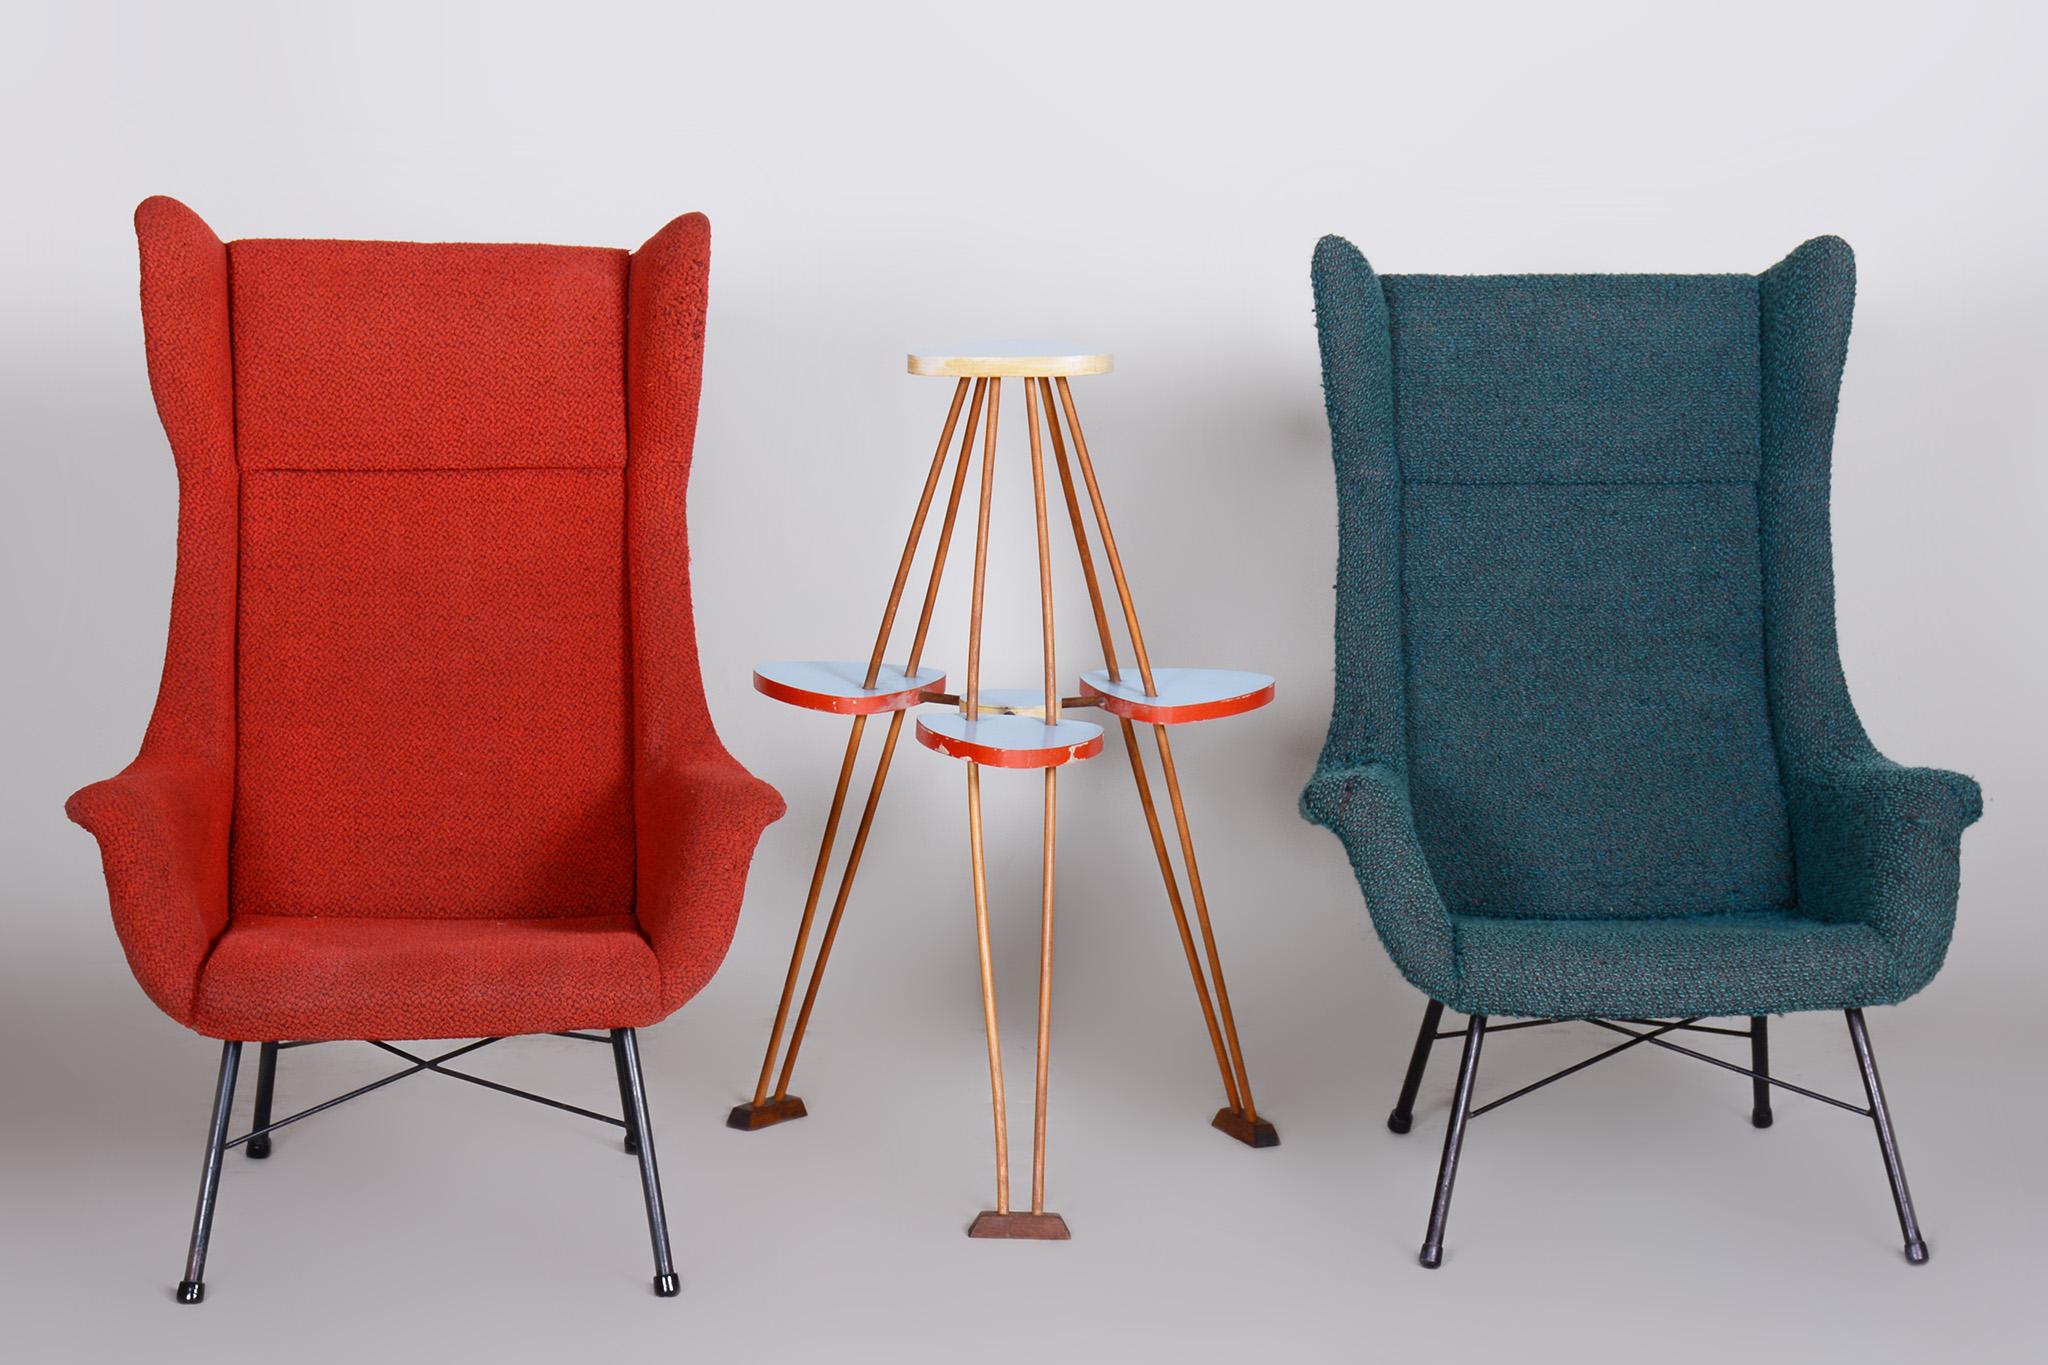 Pair of Mid Century Armchairs by Miroslav Navratil, Red and Blue, 1950s, Czechia 4